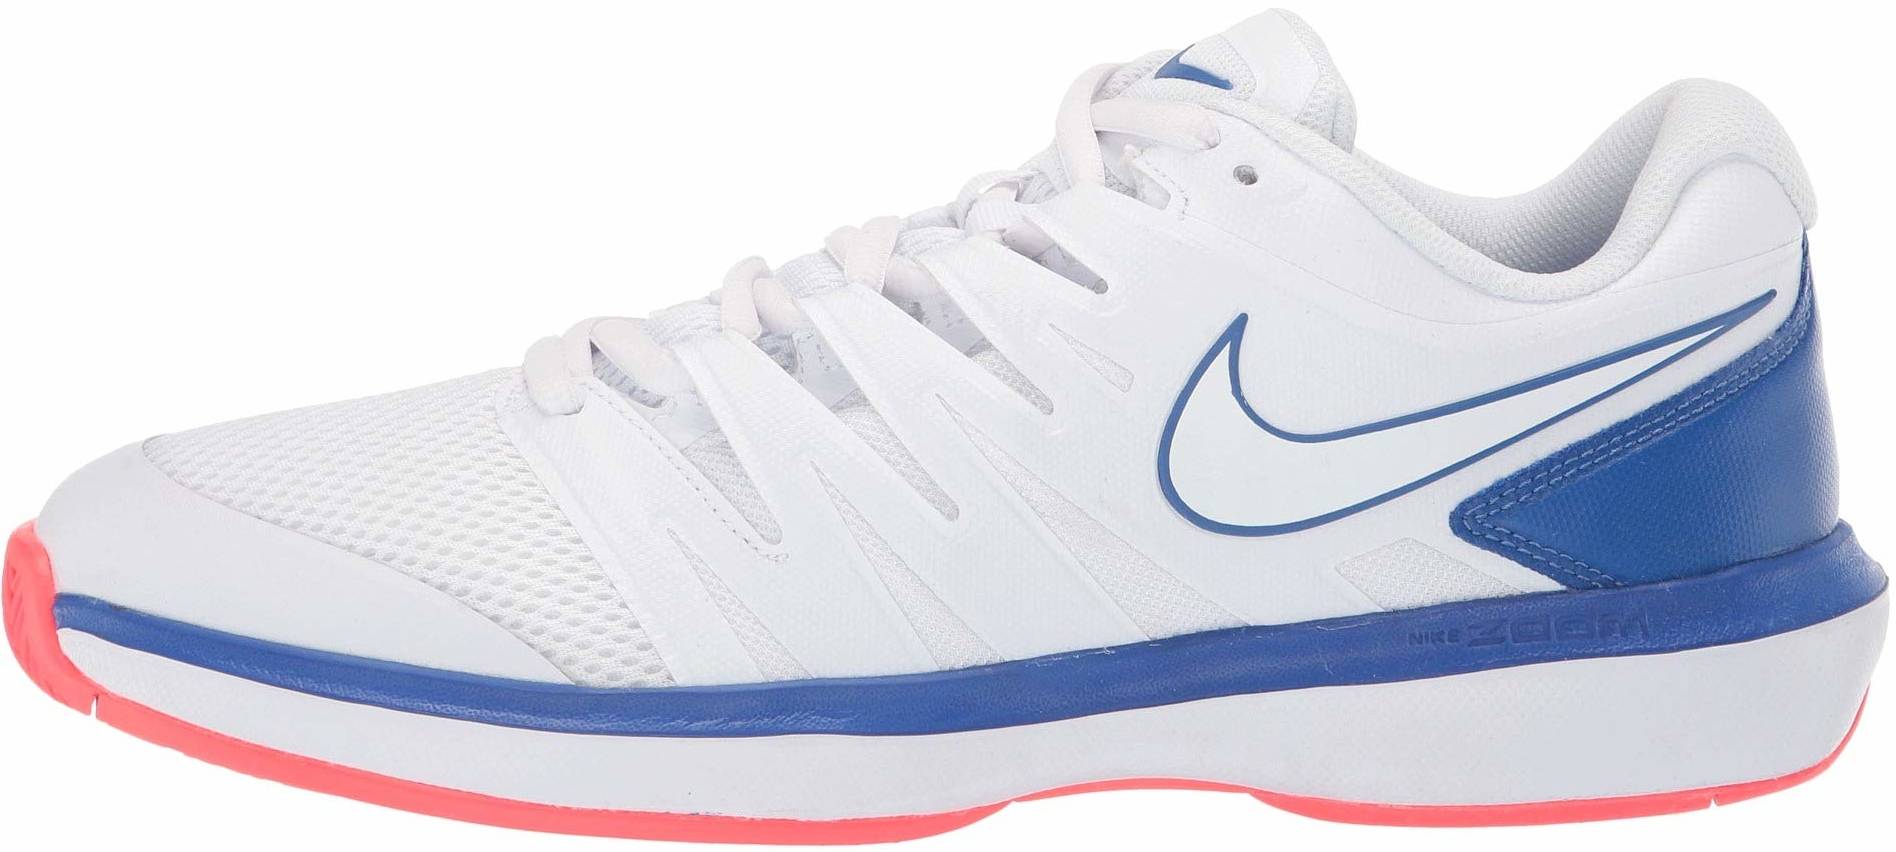 8 Reasons to/NOT to Buy NikeCourt Air Zoom Prestige (Oct 2021 ...